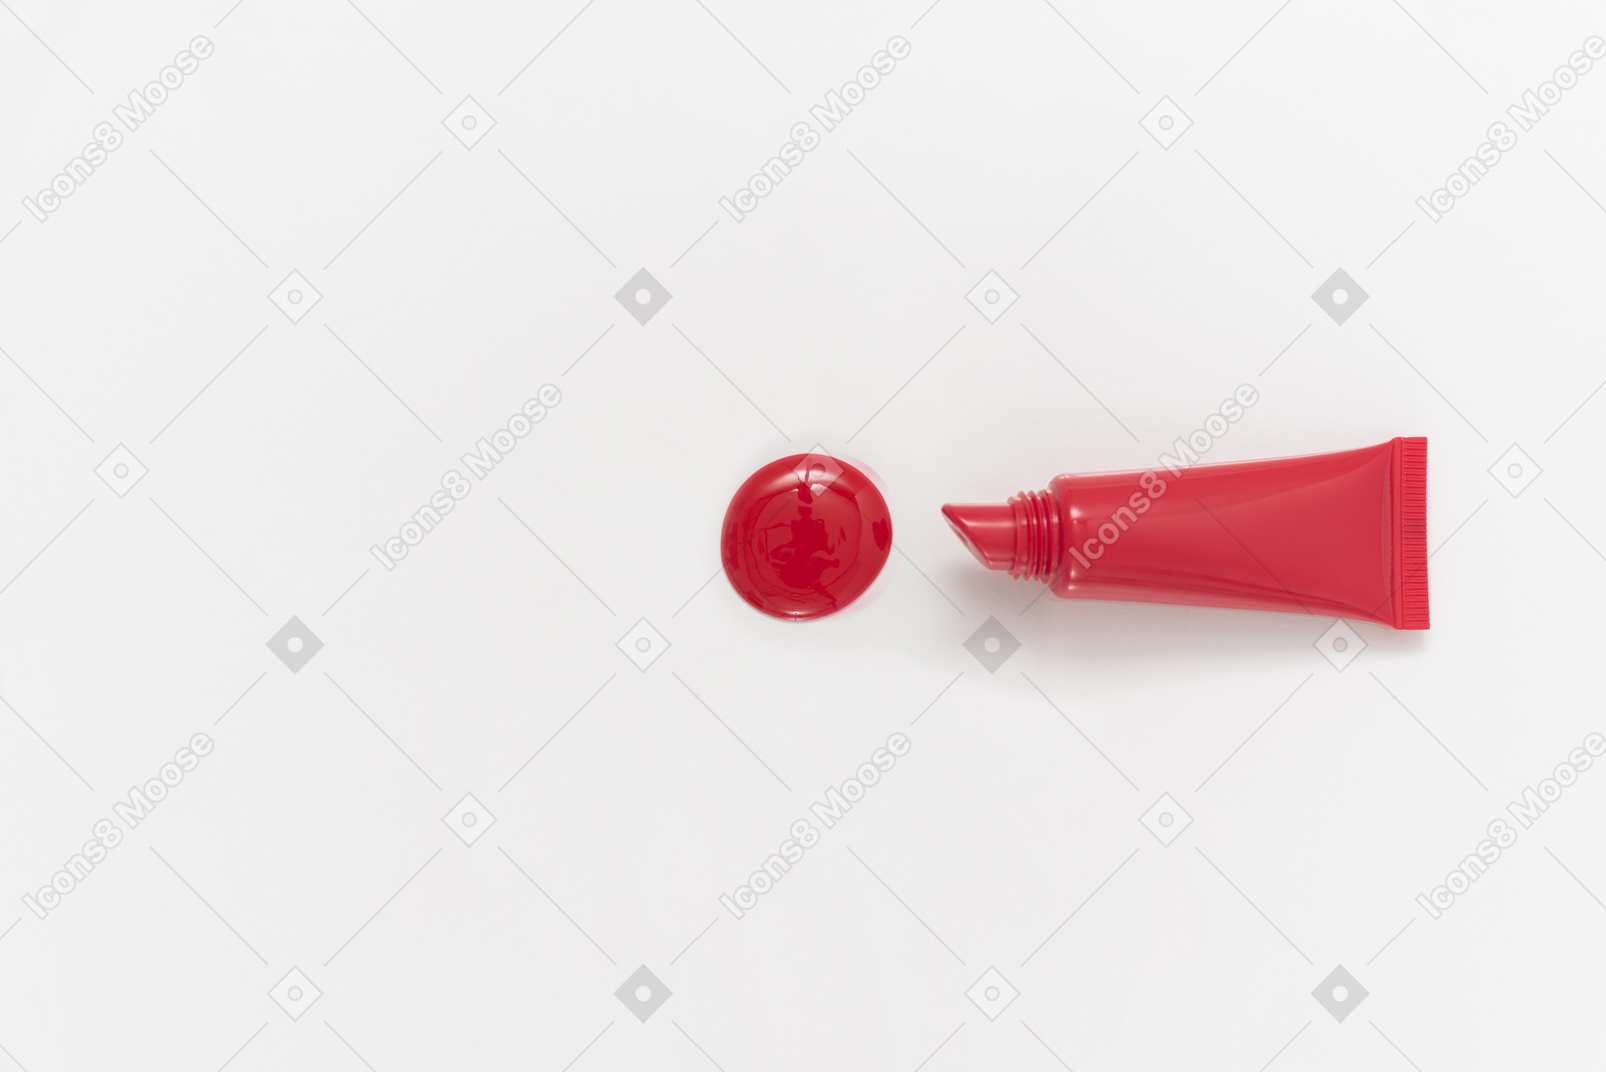 Drop of red lipstick and lipstick bottle on white background